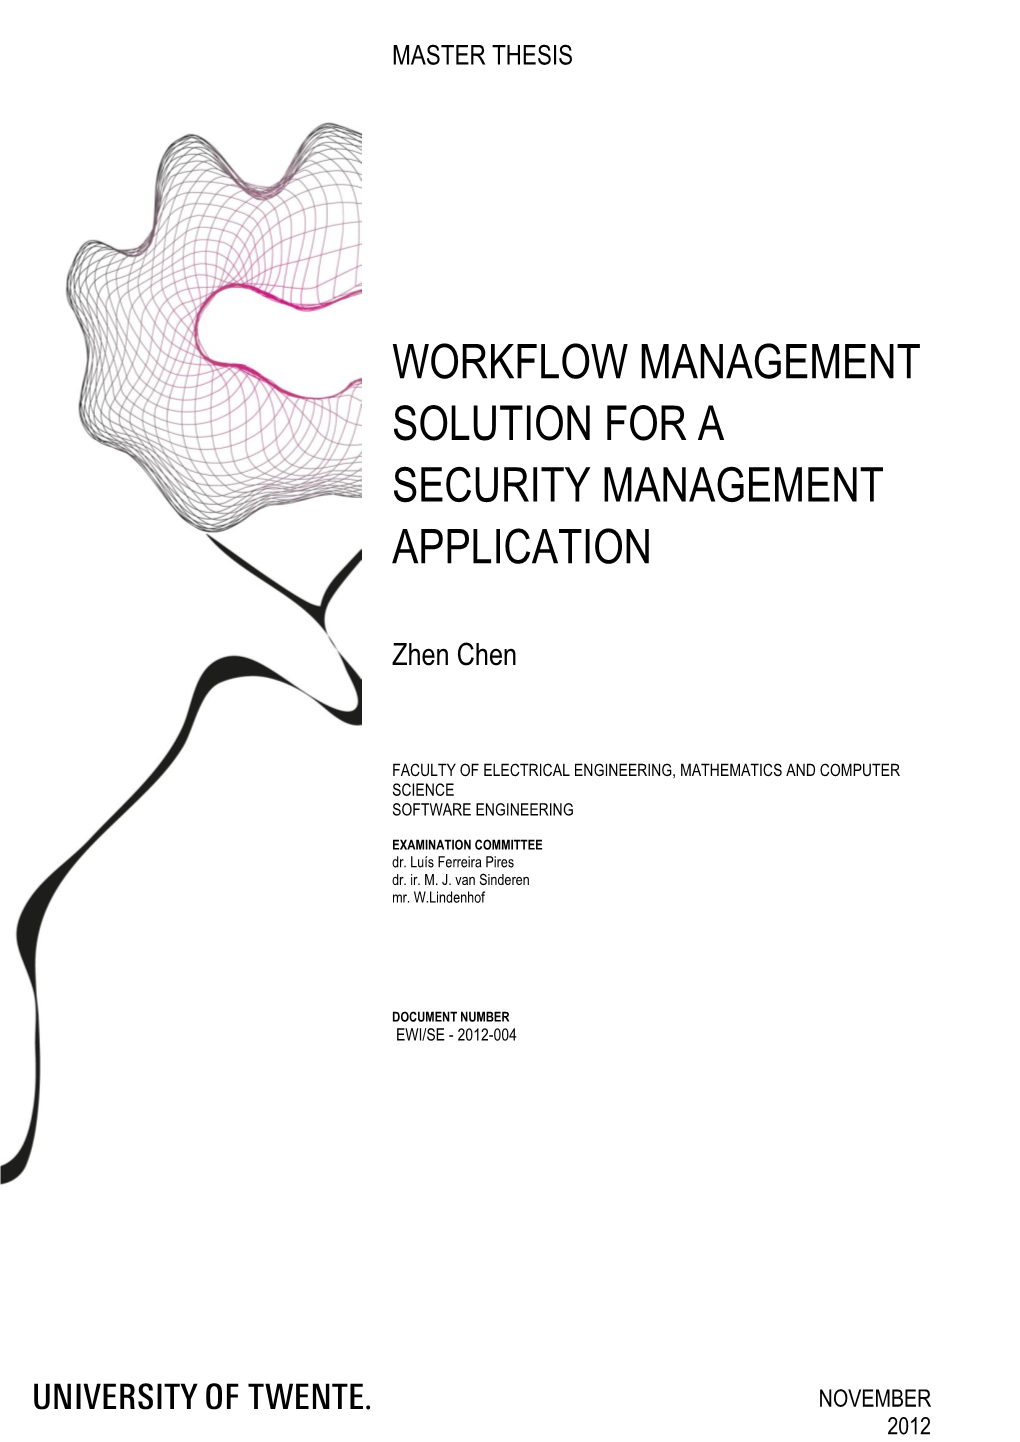 Workflow Management Solution for a Security Management Application